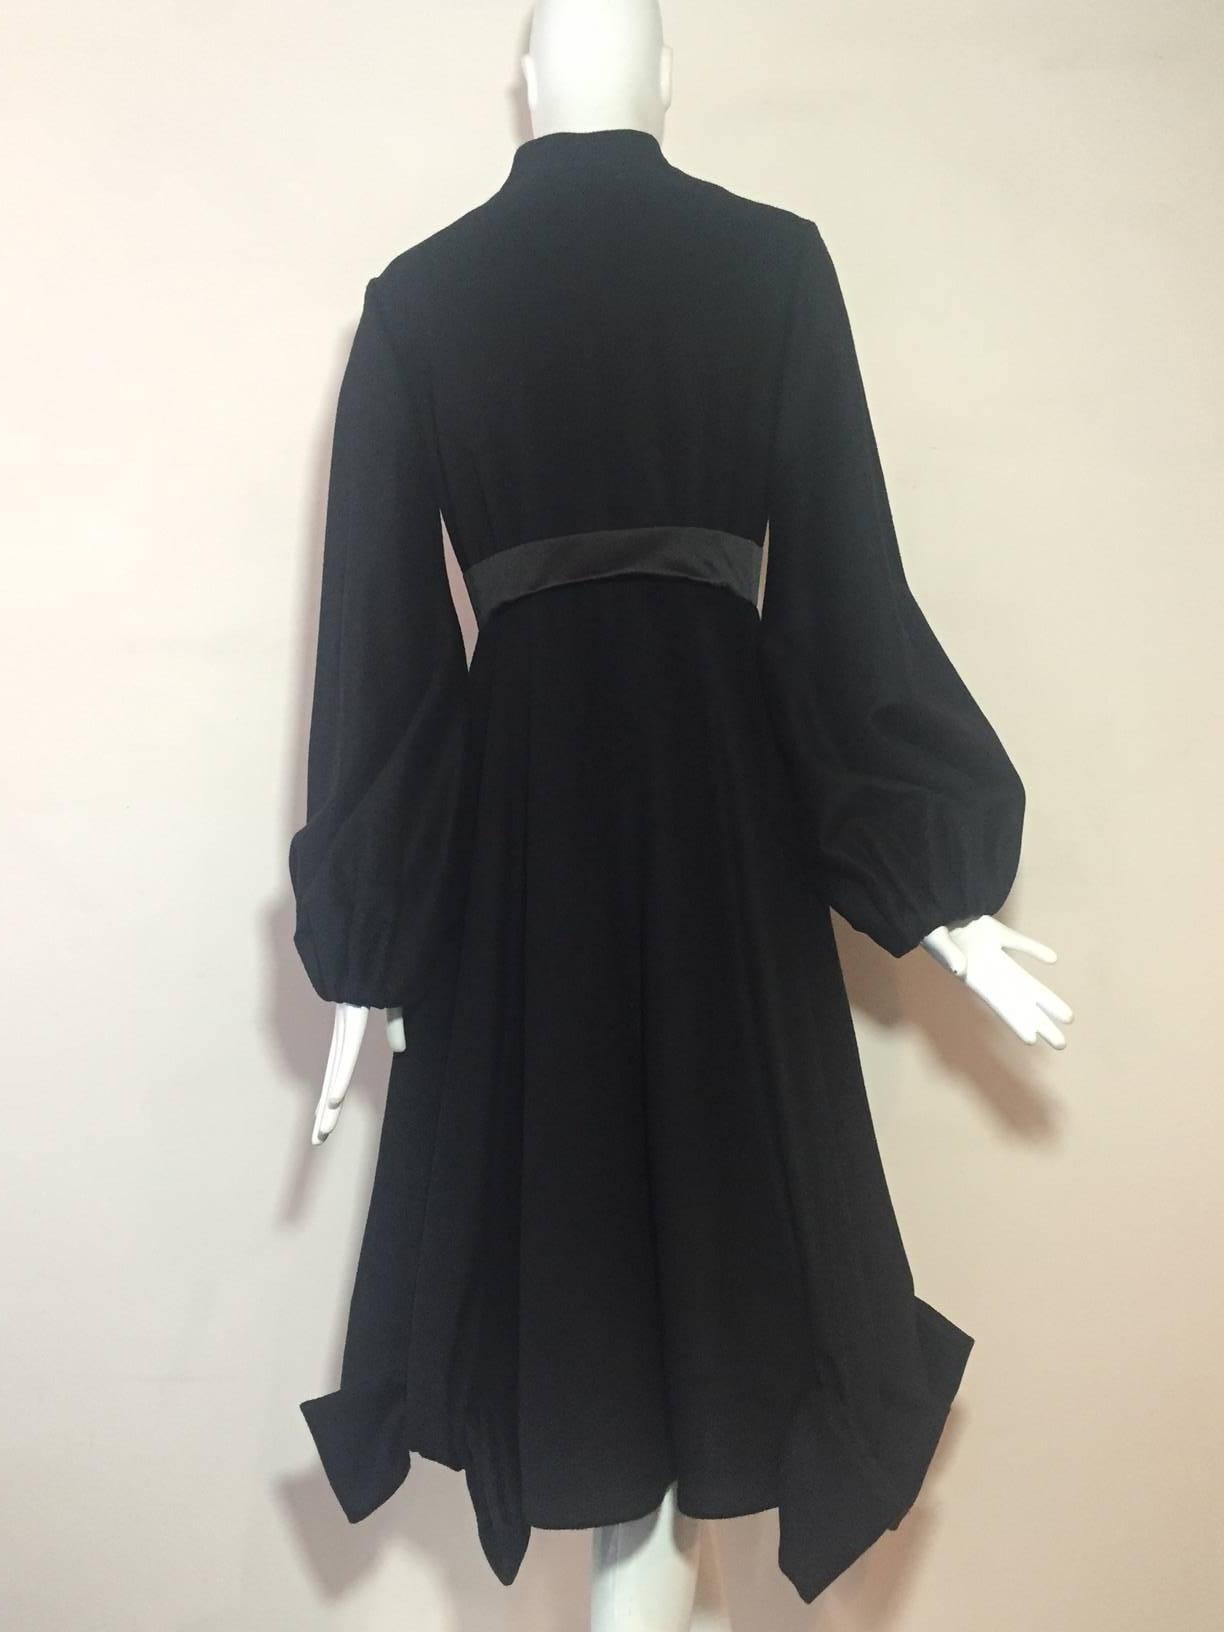 A beautiful Givenchy black wool and cashmere Princess style coat:  Banded neck with hidden snap closures. Silk satin empire waistband. Balloon tucked snap-closure sleeves.  Full skirt with interesting sculpted bow detail at hem.  Rayon floral satin